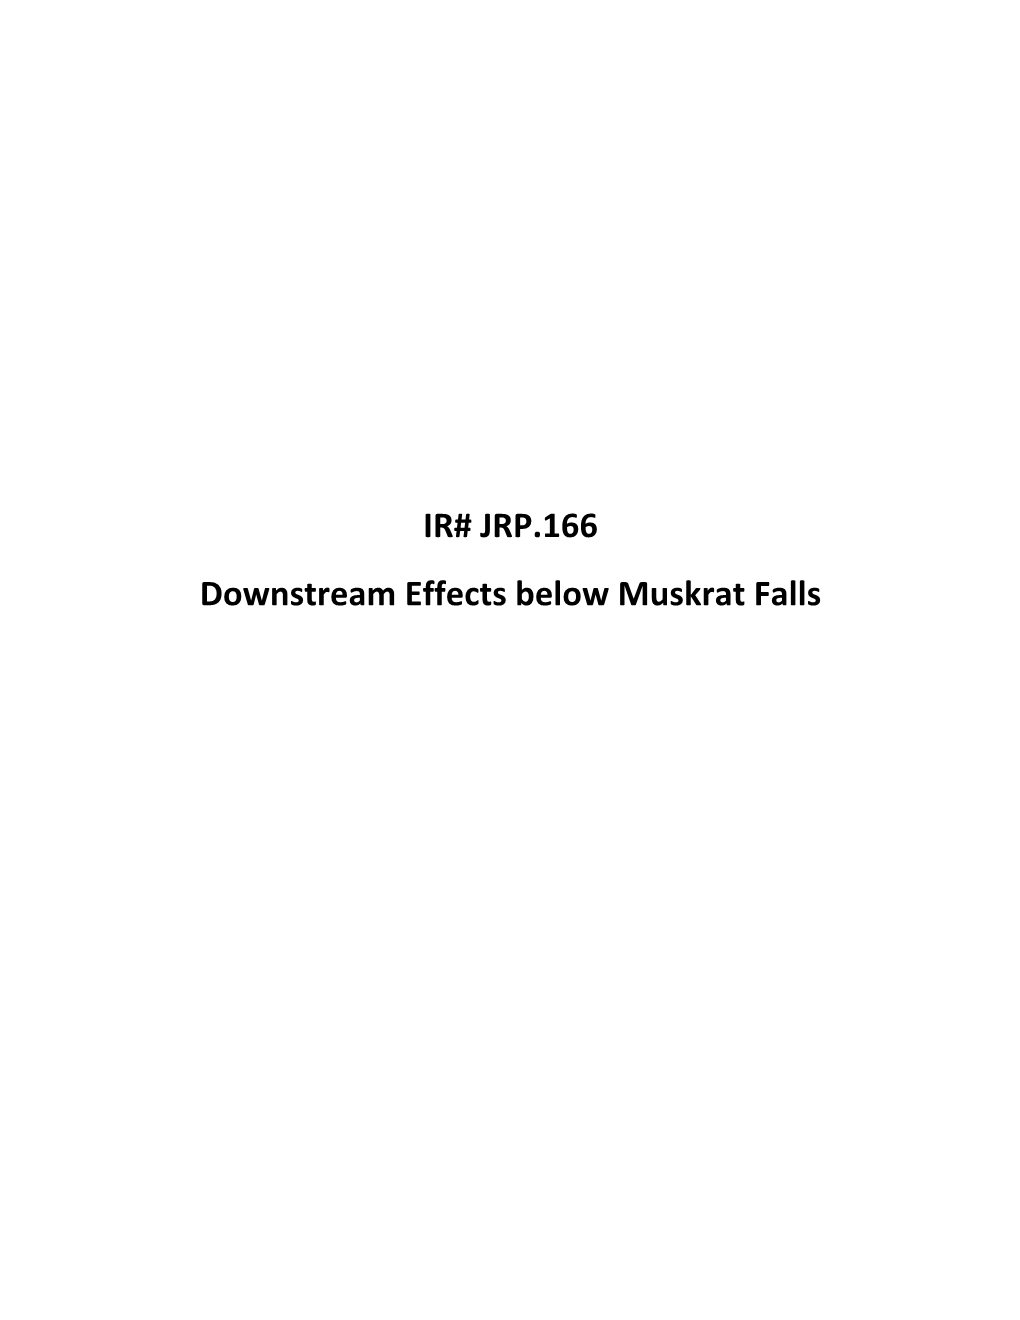 IR# JRP.166 Downstream Effects Below Muskrat Falls INFORMATION REQUESTS RESPONSES| LOWER CHURCHILL HYDROELECTRIC GENERATION PROJECT